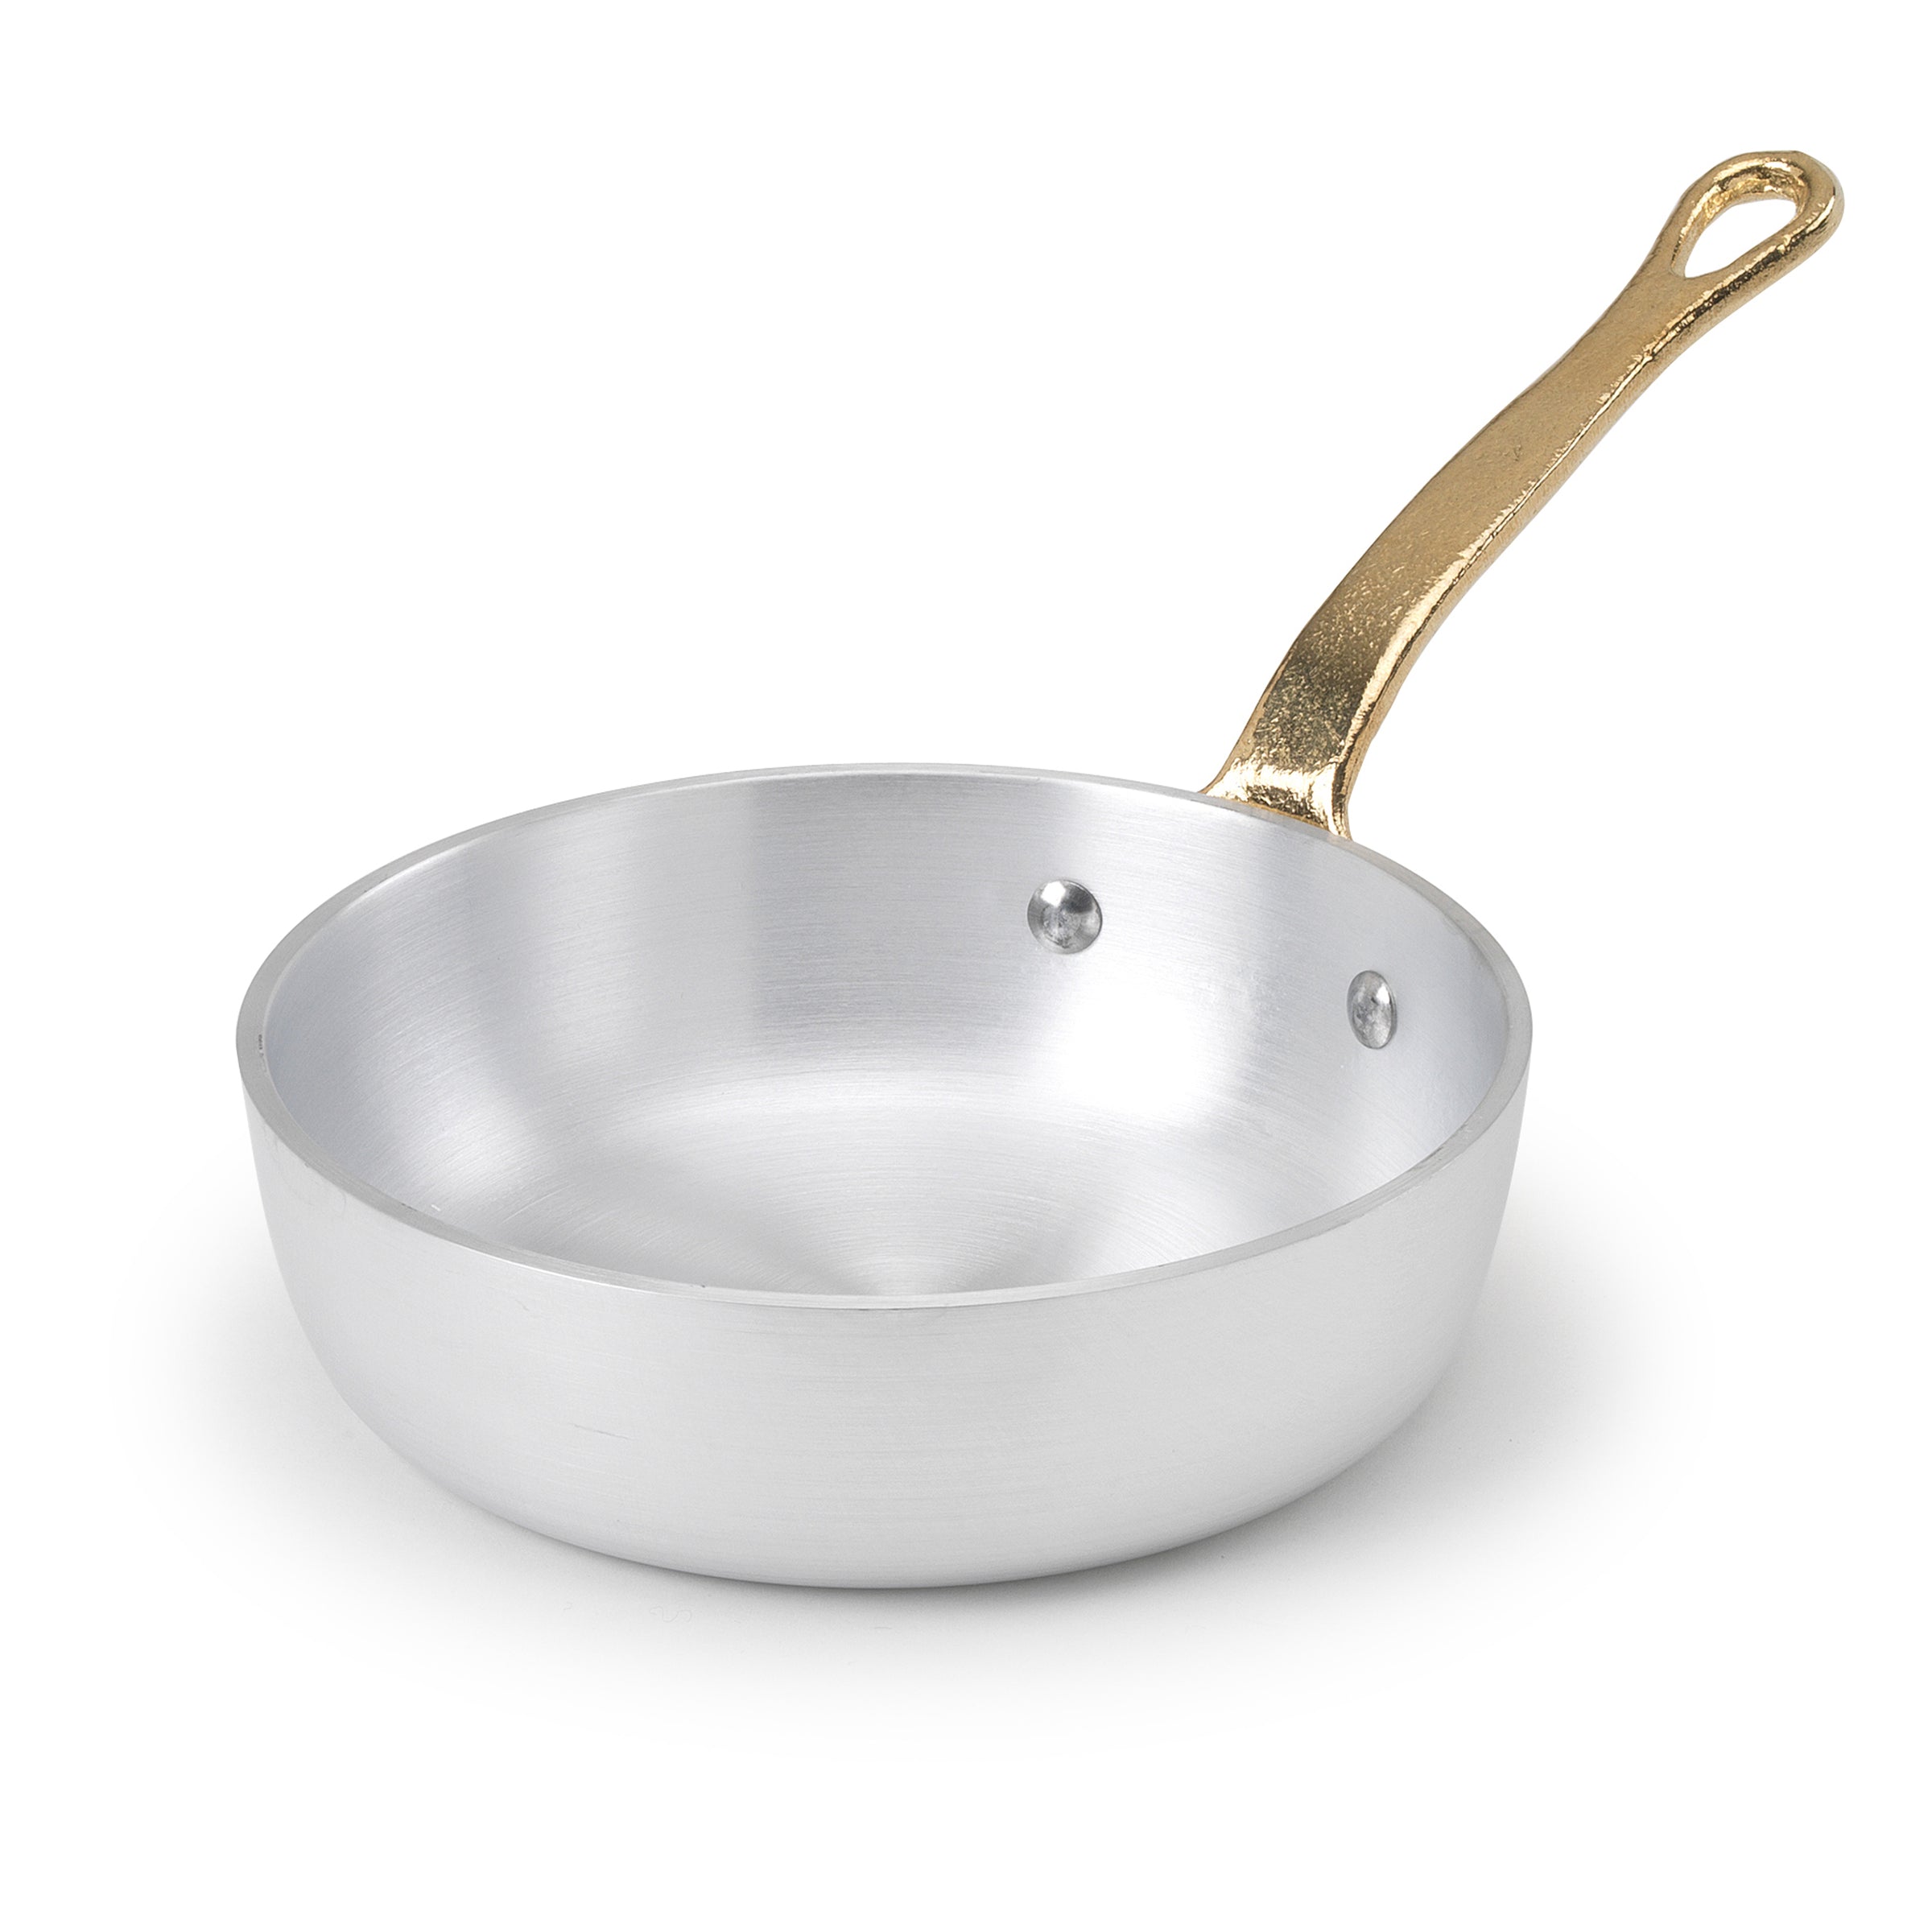 Agnelli 1932 Series Aluminum Mini Fry Pan With Brass Handle, 11.3